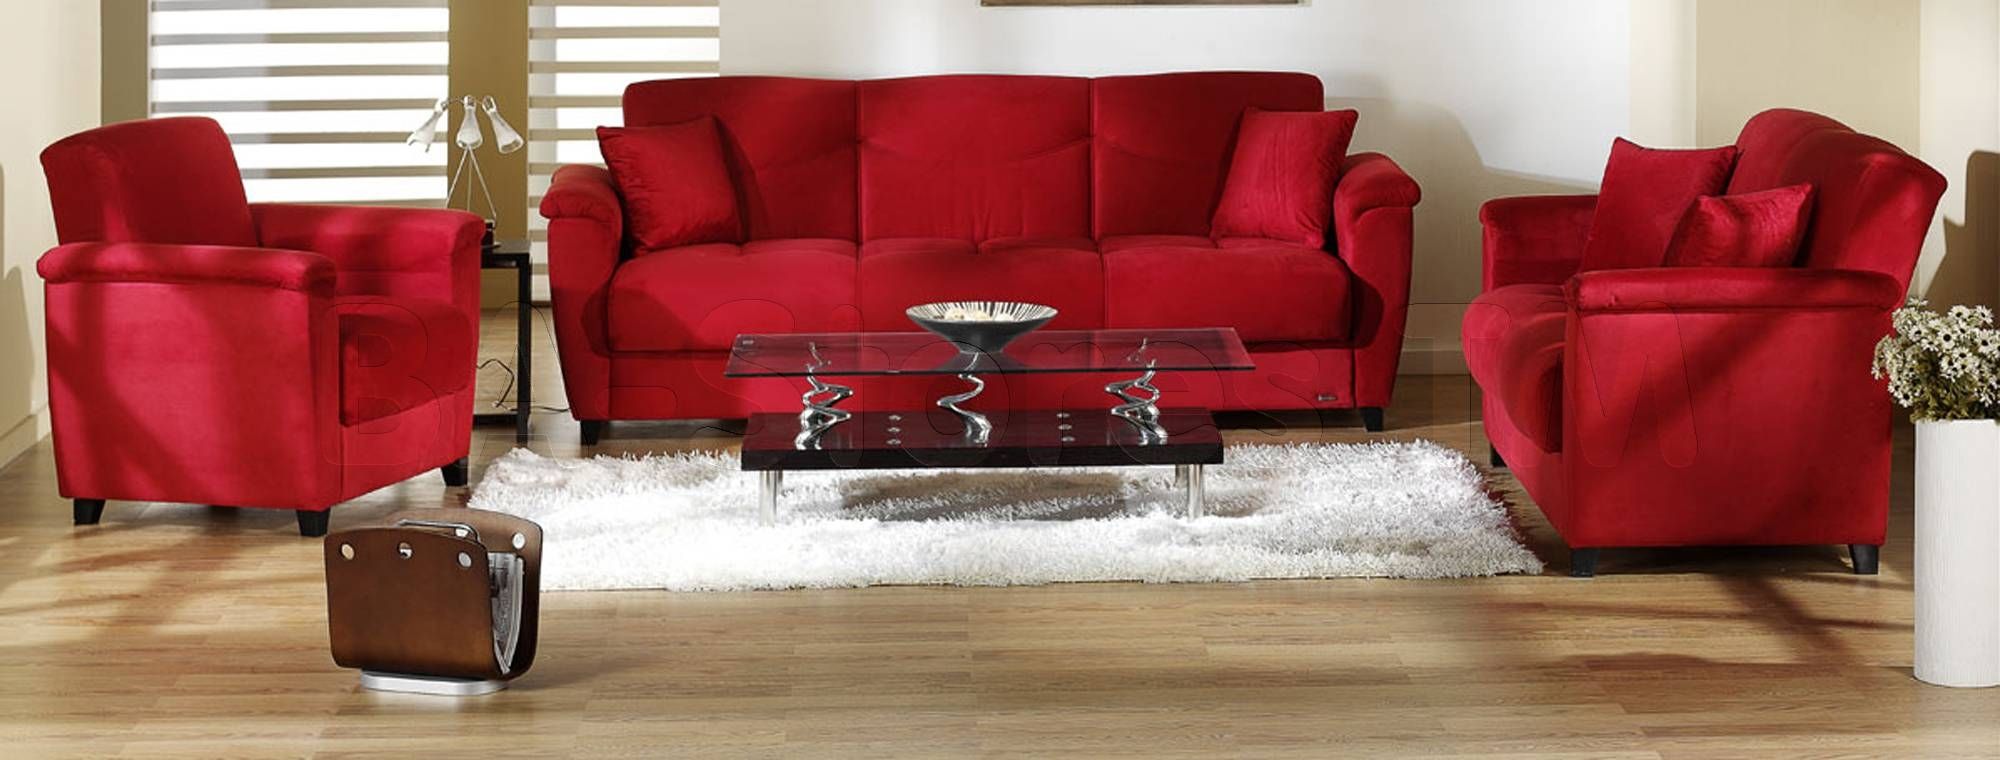 Red Sofa Decor Images Of Photo Albums Red Living Room Furniture With Regard To Red Sofa Chairs 